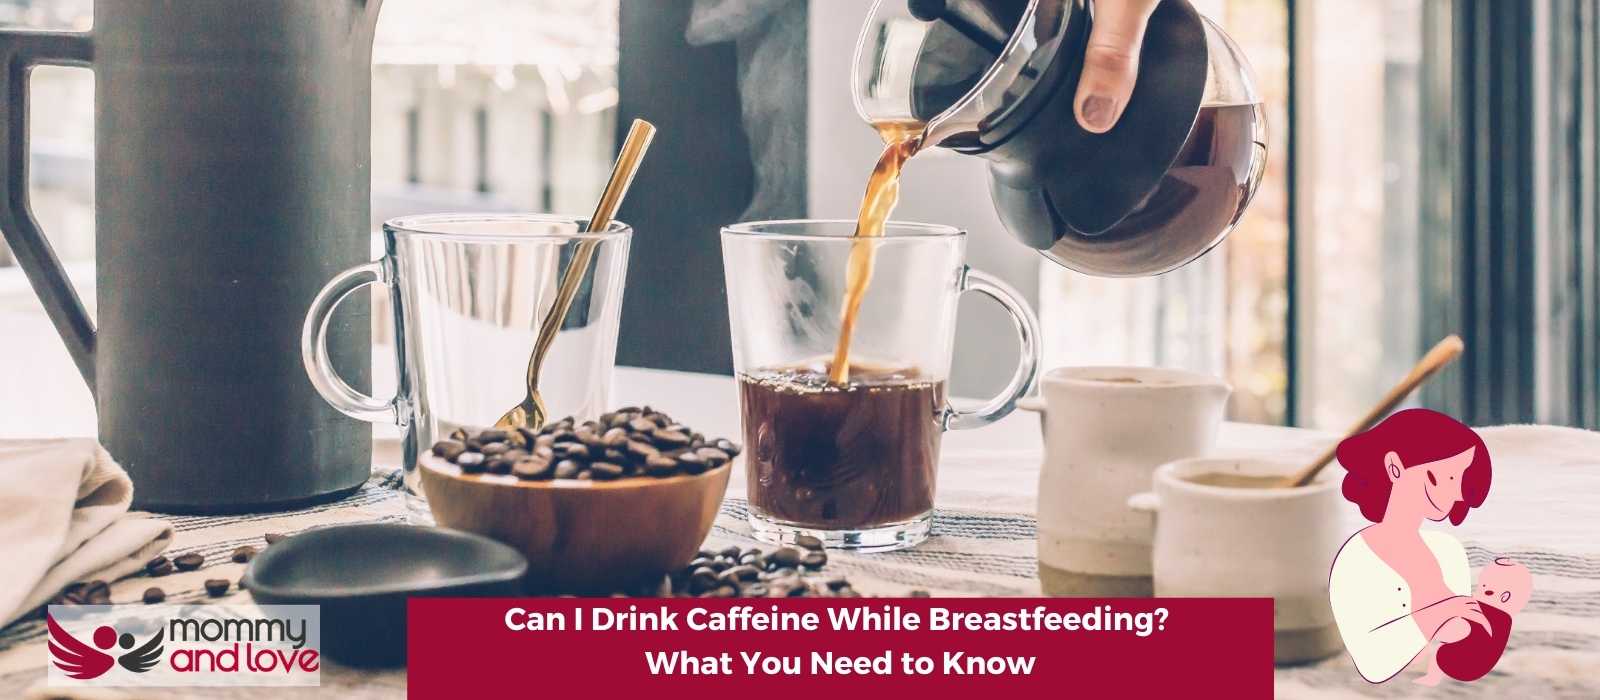 Can I Drink Caffeine While Breastfeeding What You Need to Know